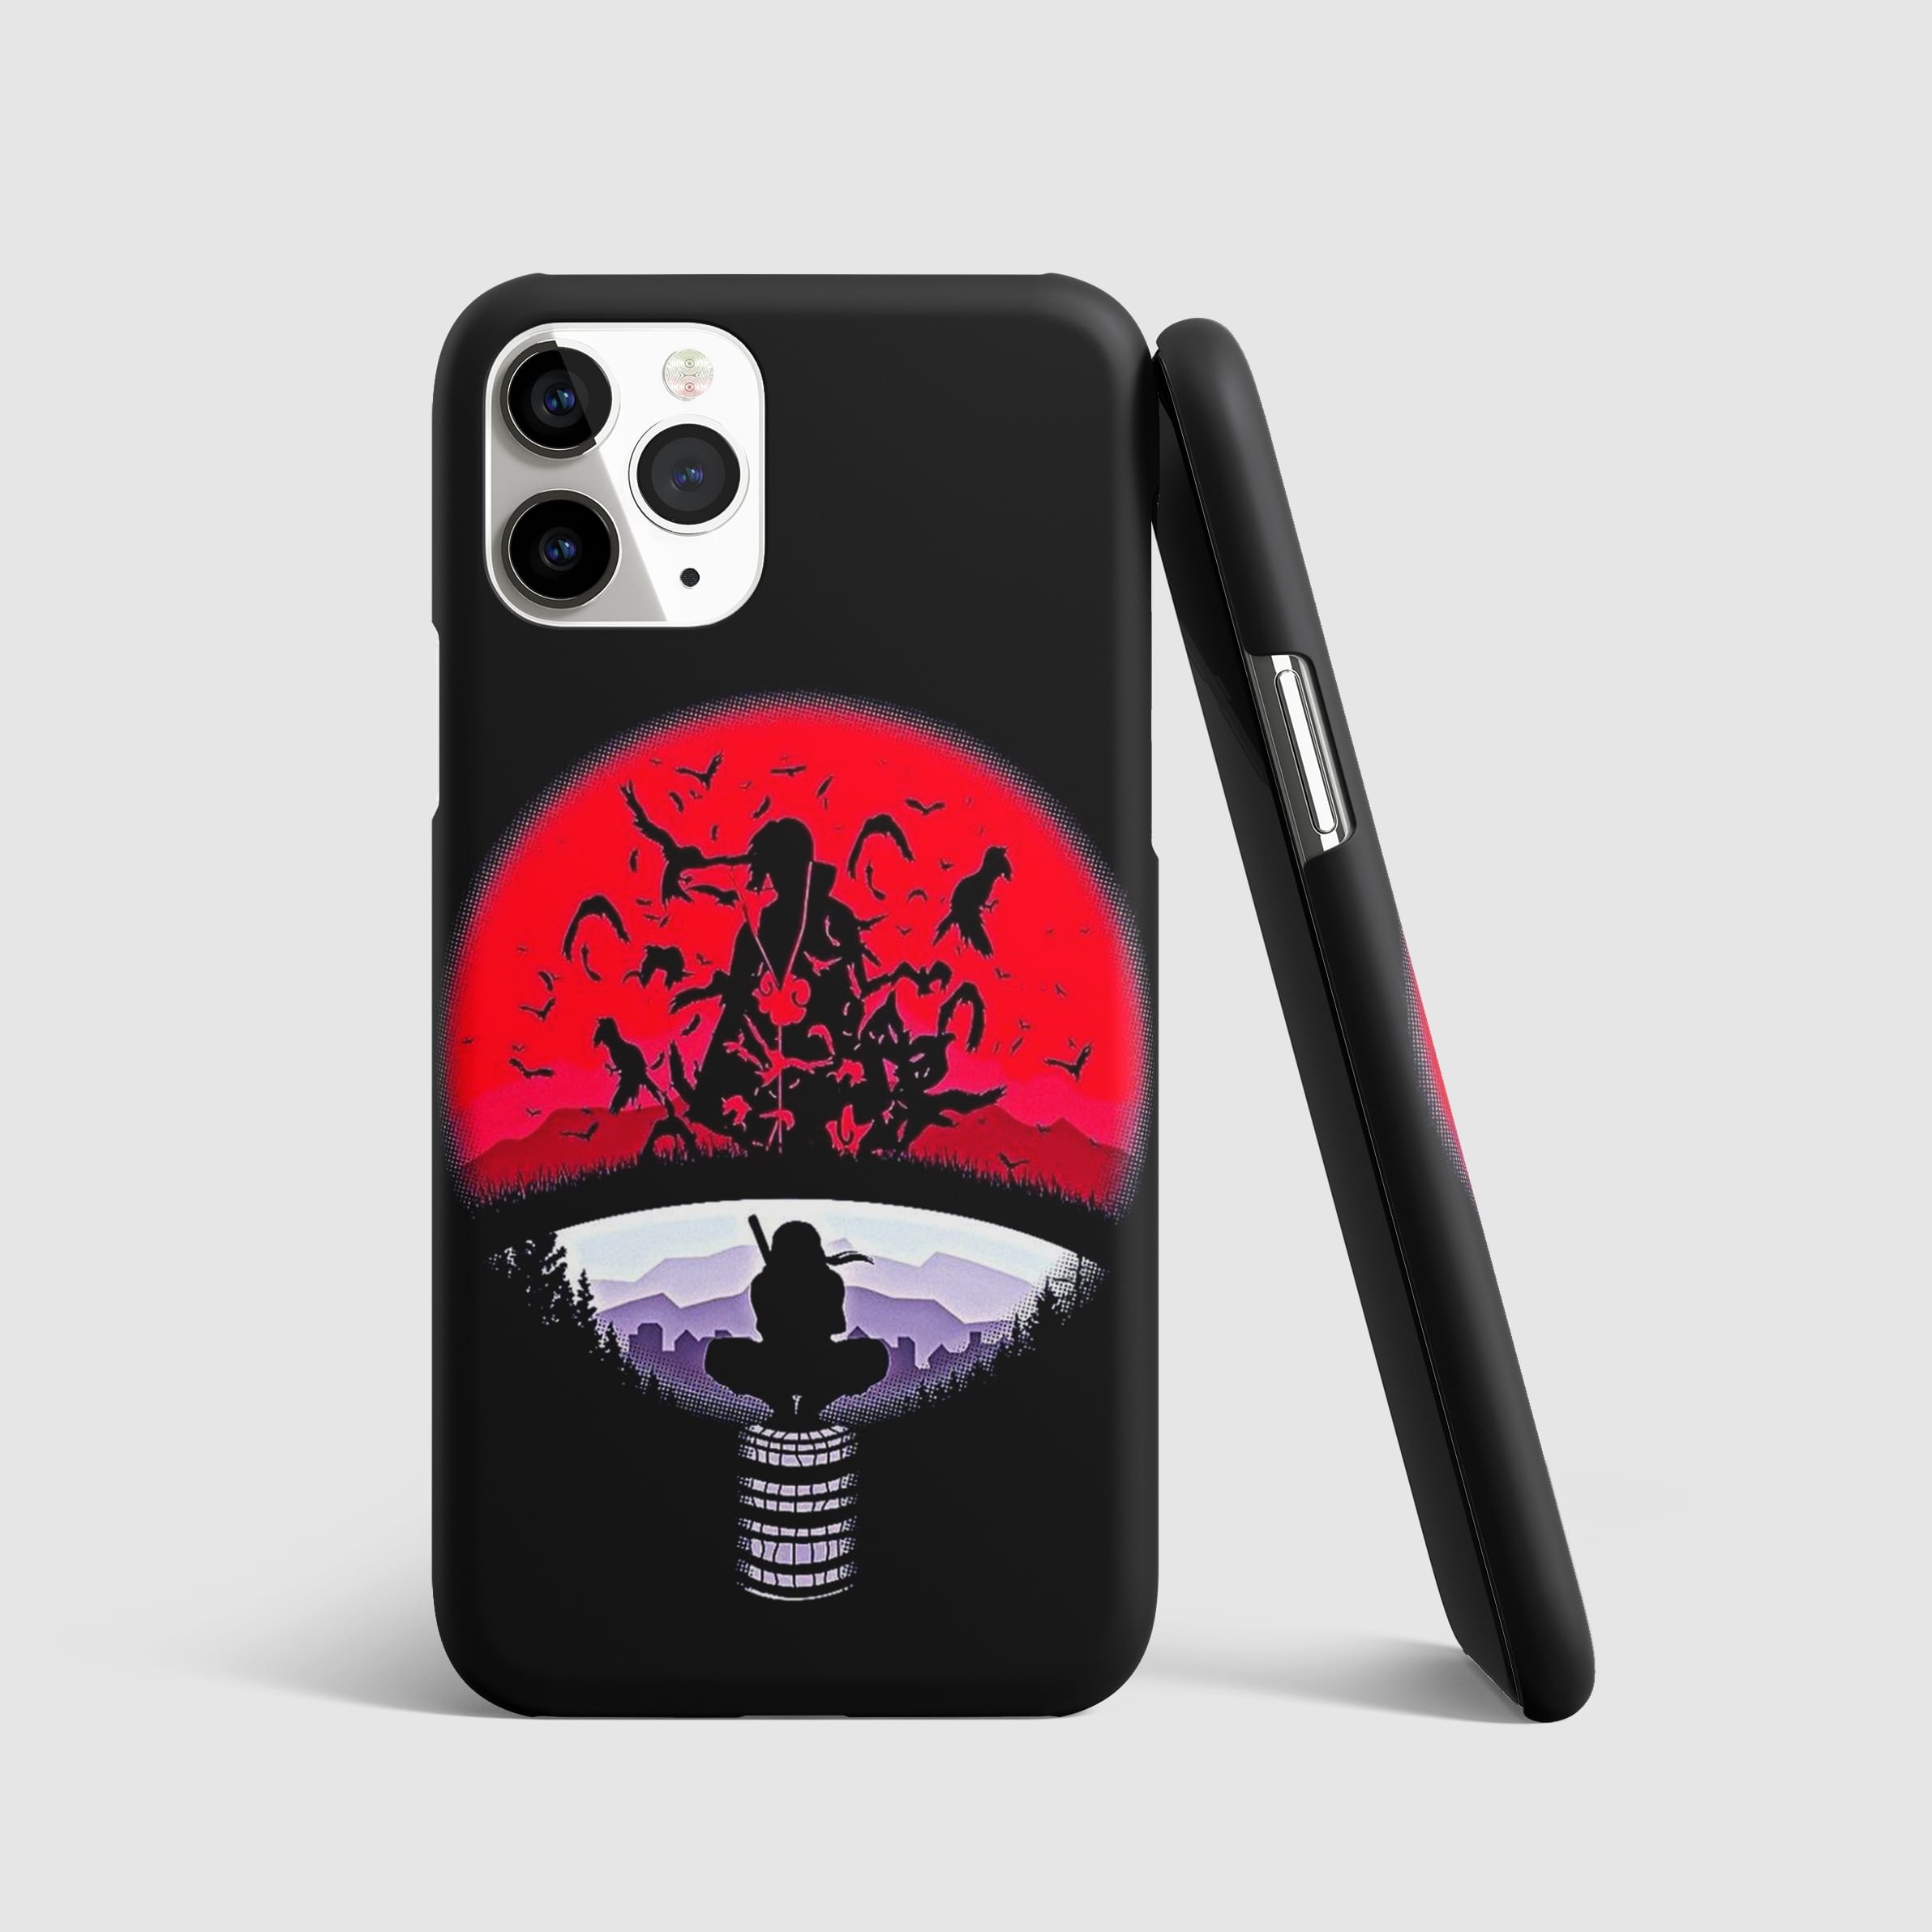 Uchiha Clan Symbol Phone Cover with 3D matte finish, featuring the iconic Uchiha Clan symbol.